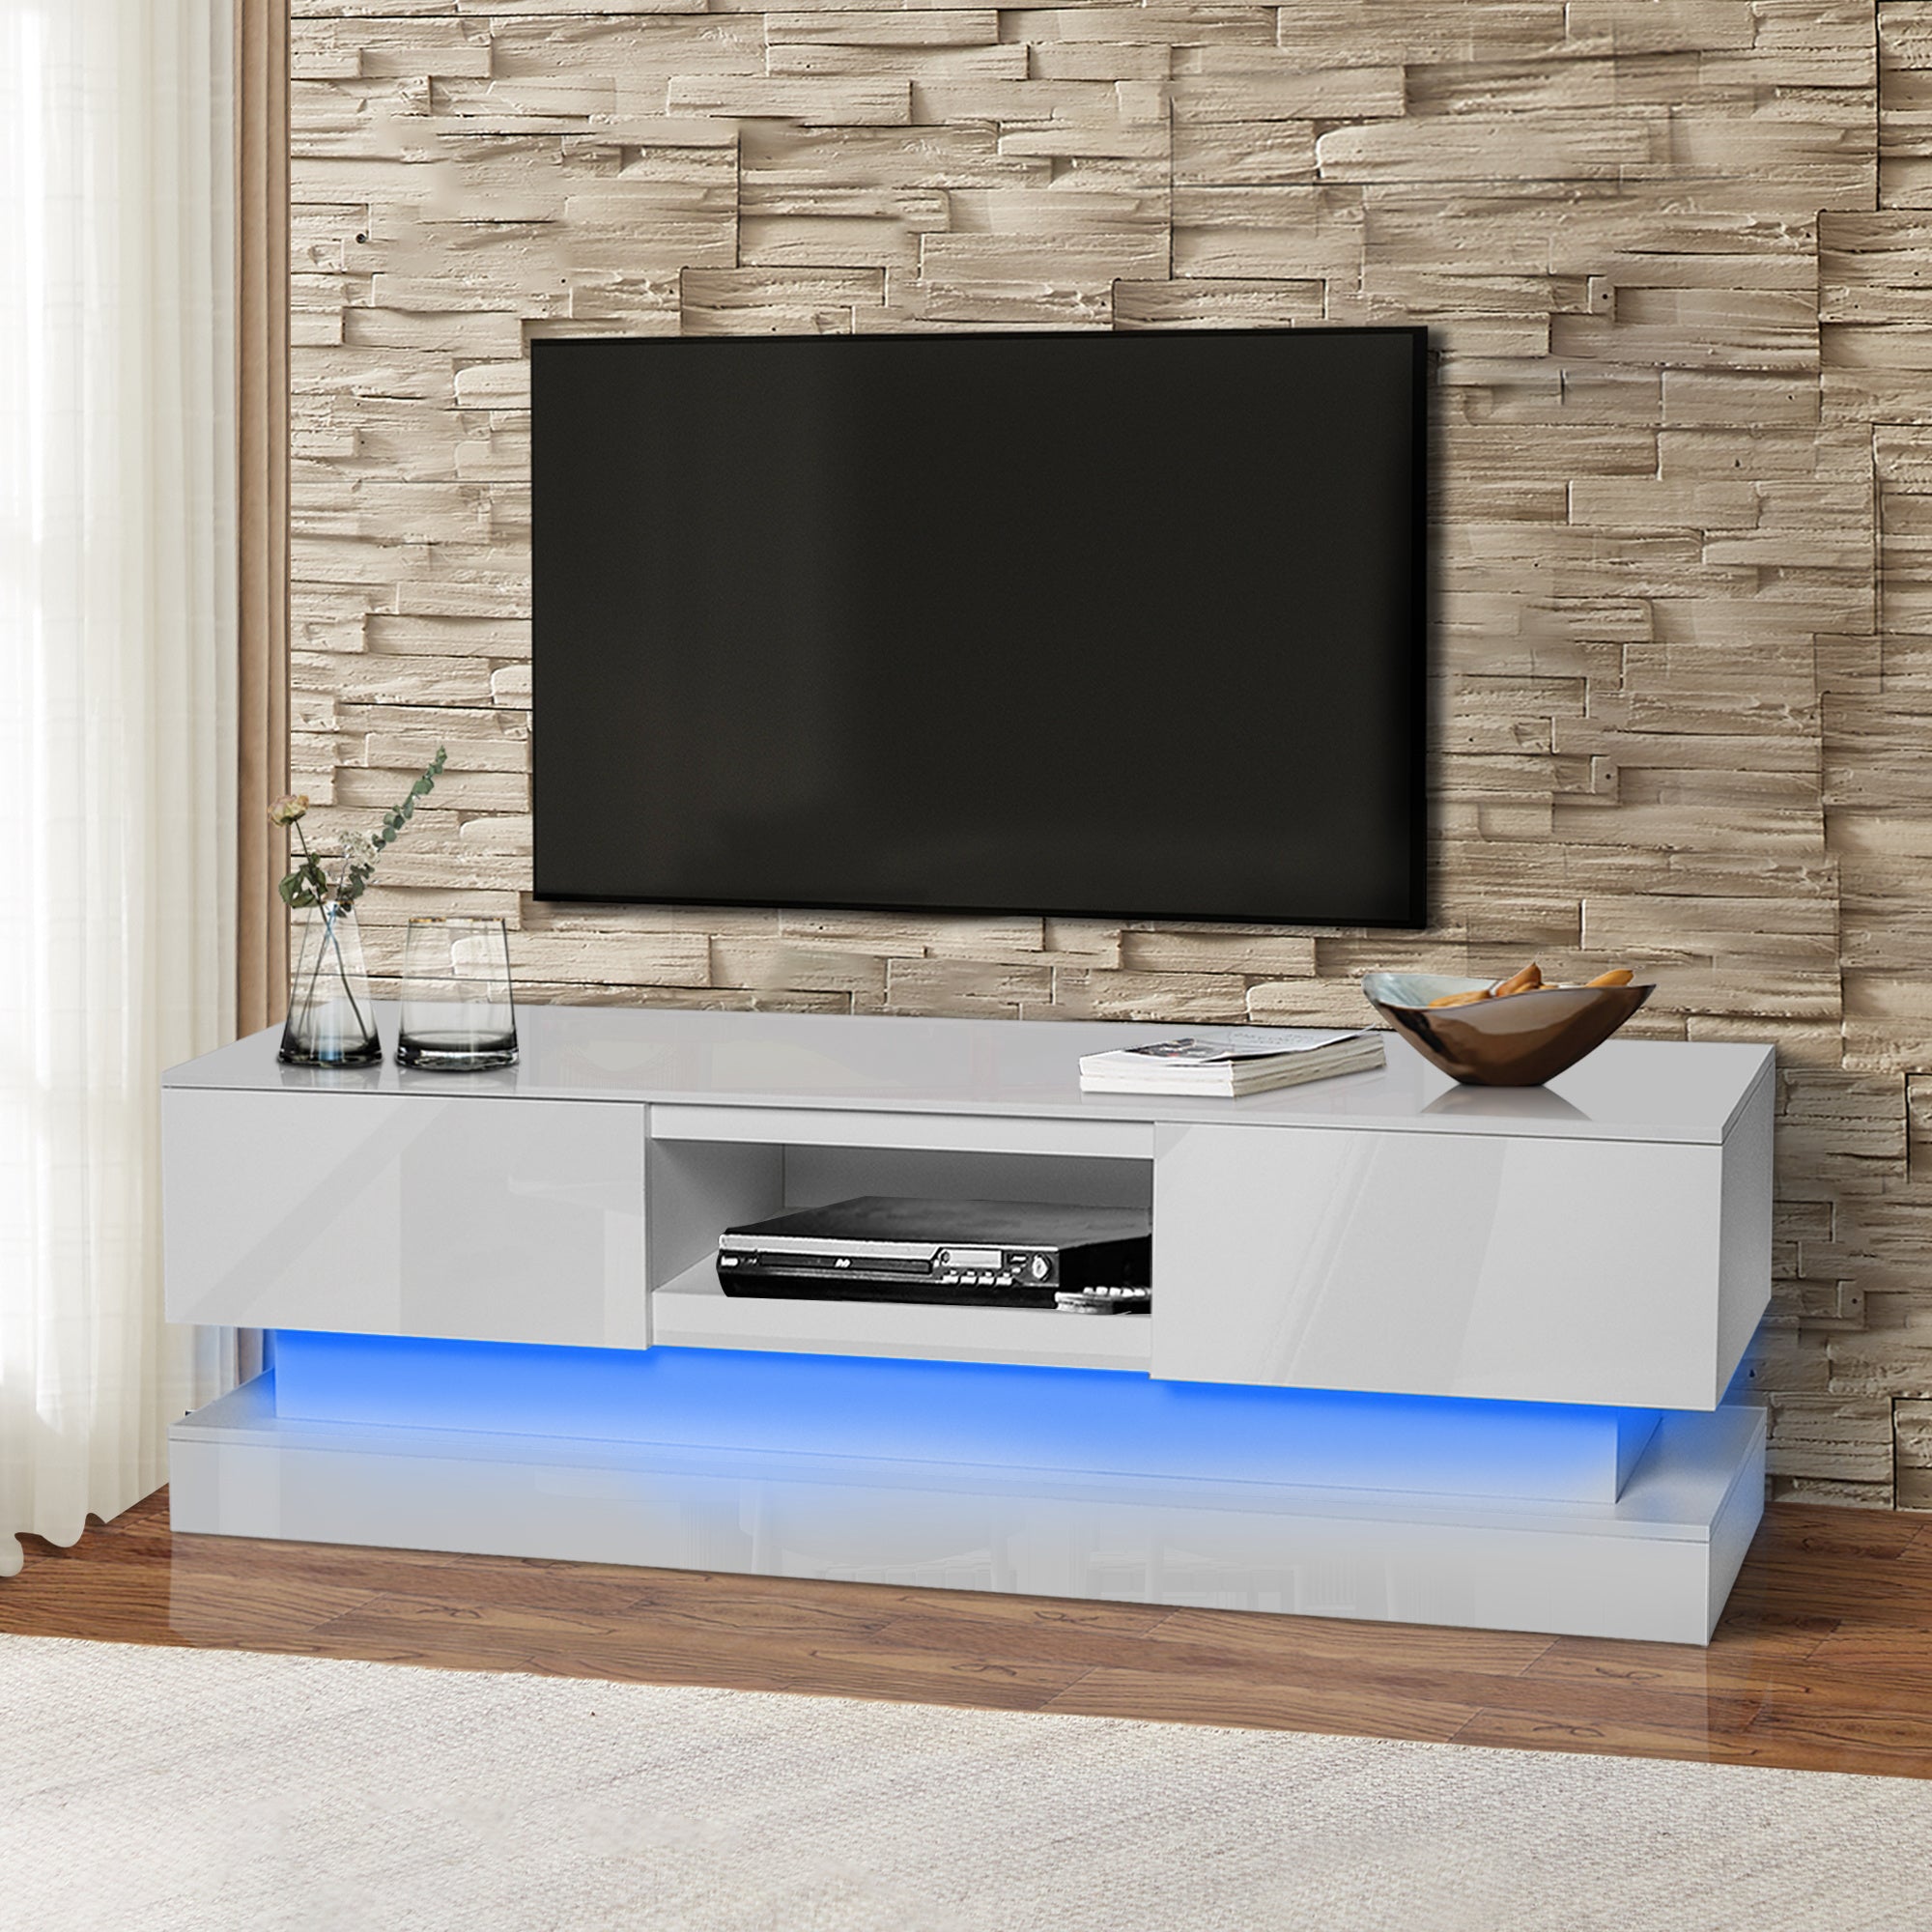 TV18-51.18inch WHITE morden TV Stand with LED Lights,high glossy front TV Cabinet,can be assembled in Lounge Room, Living Room or Bedroom,color:WHITE